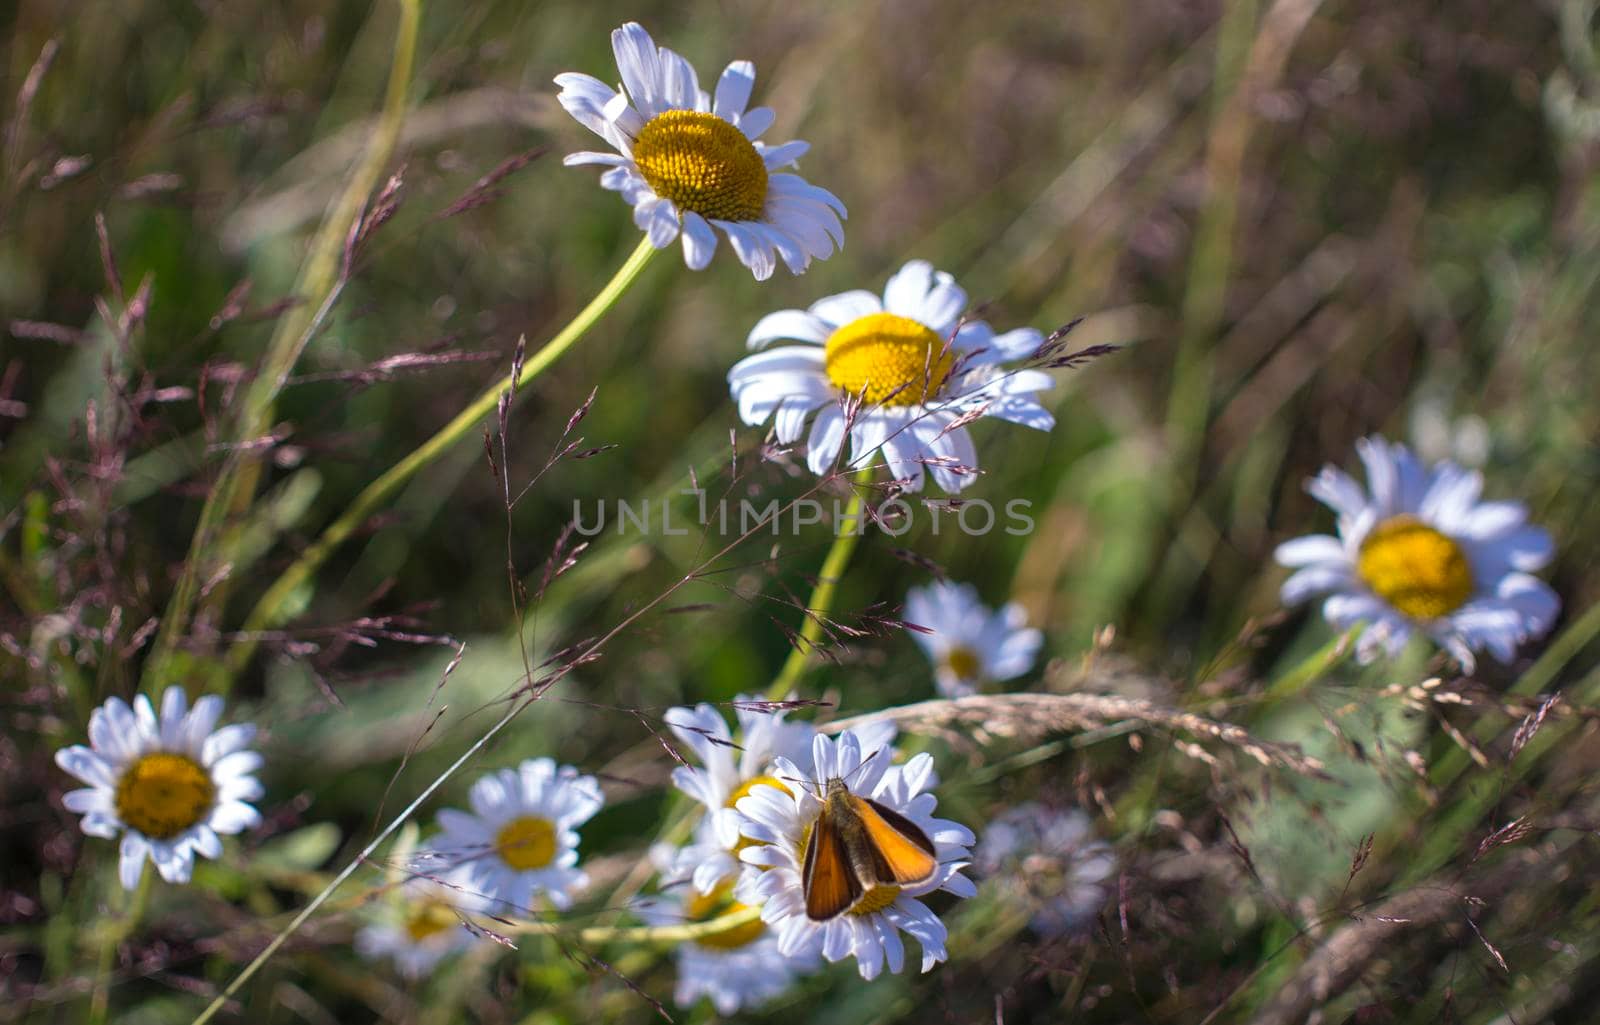 Bright orange butterflies on daisy flowers. The yellow orange butterfly is on the white chamomile flowers in the green grass fields